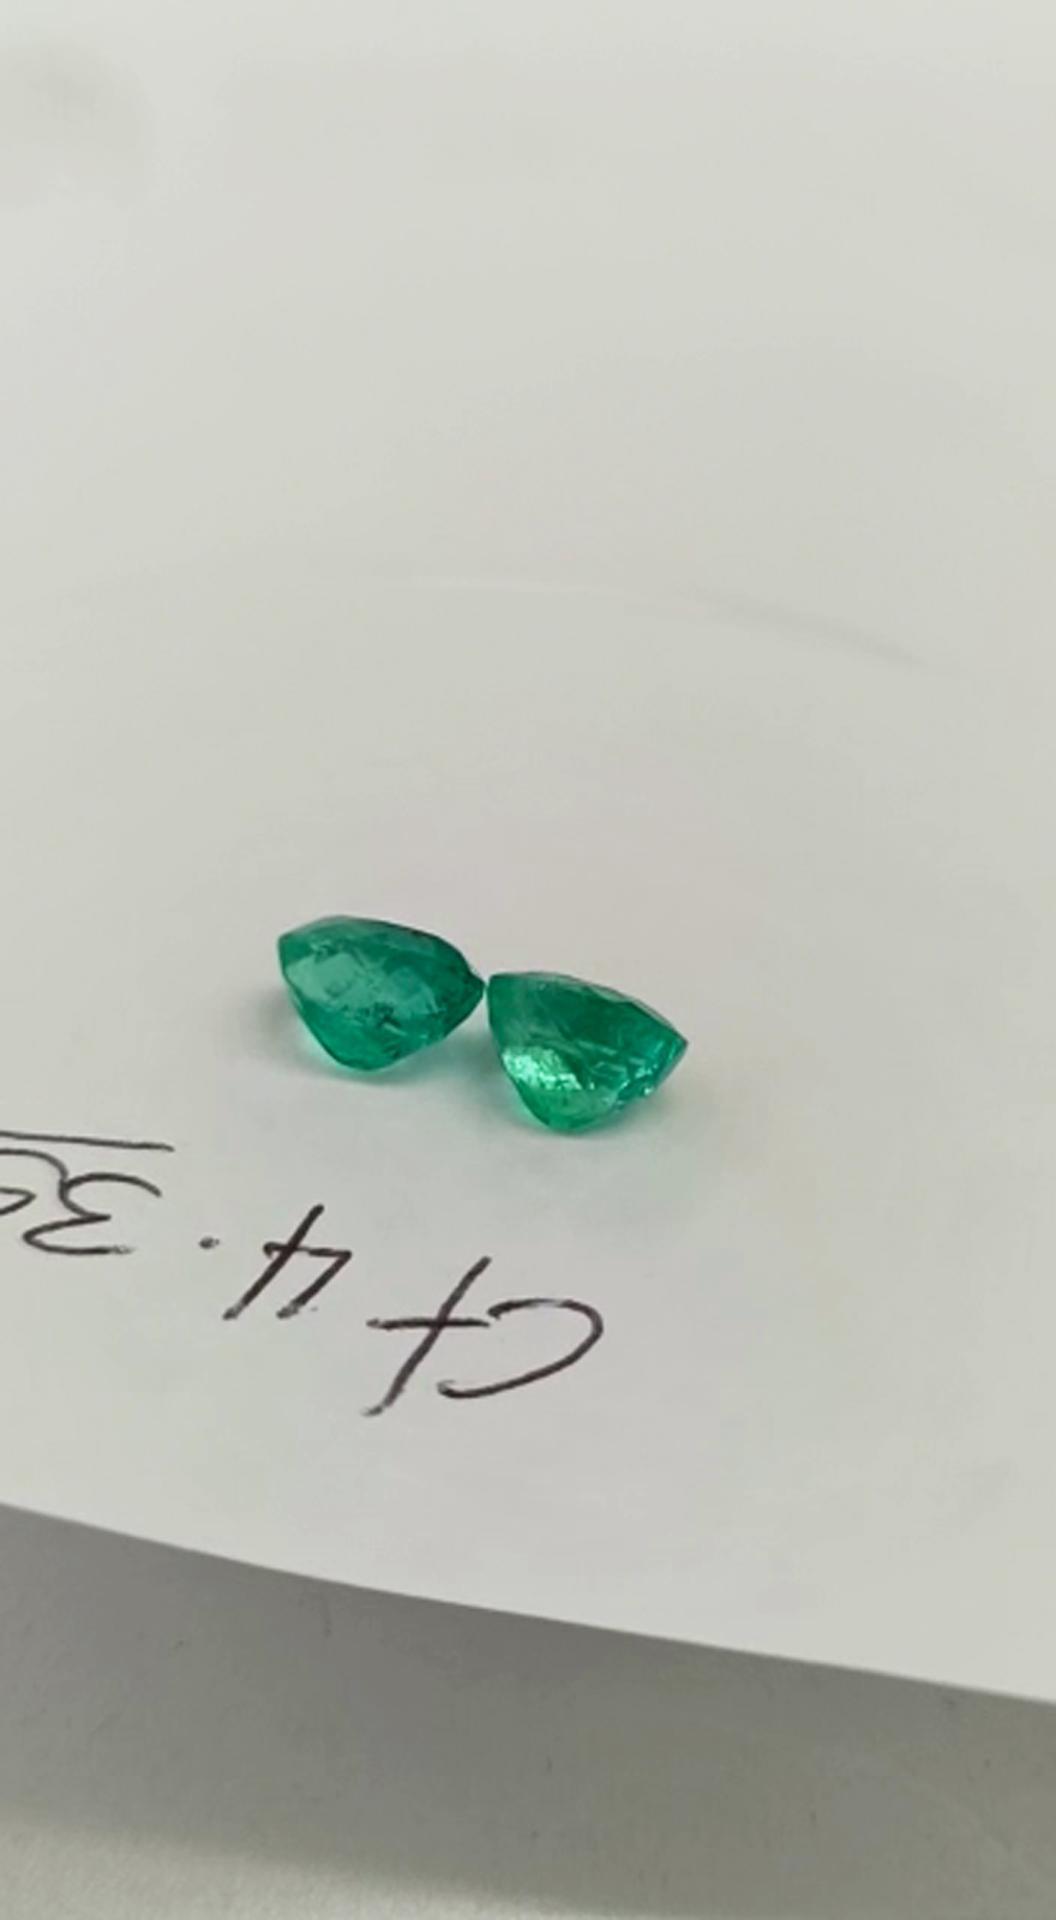 4.35 Ct. Colombian Emerald Pair